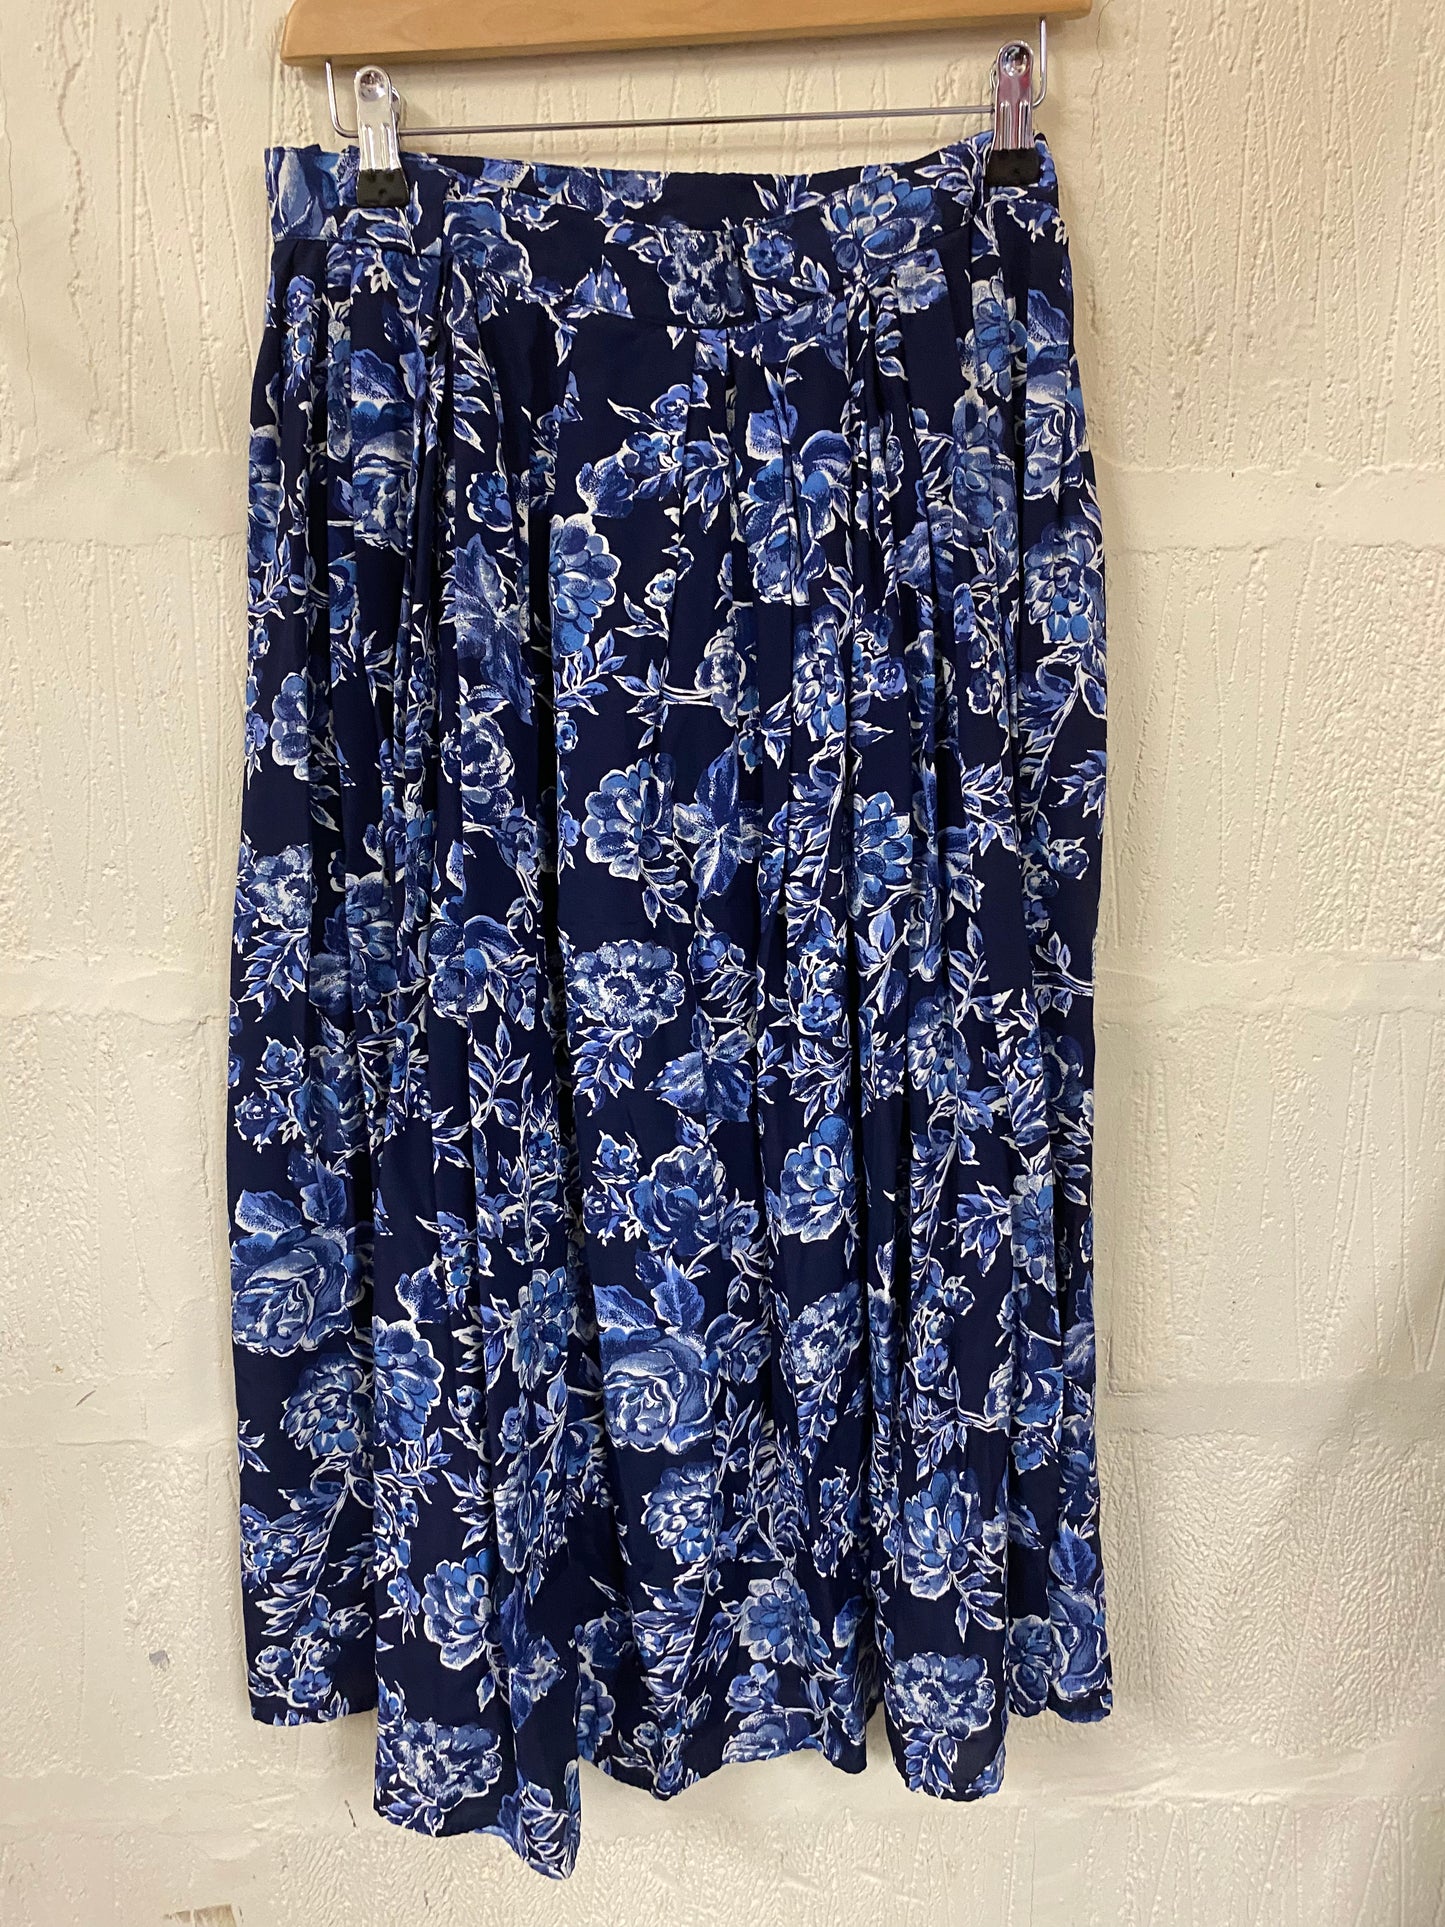 Vintage St Michael White and Blue Floral Midi Skirt Size 14